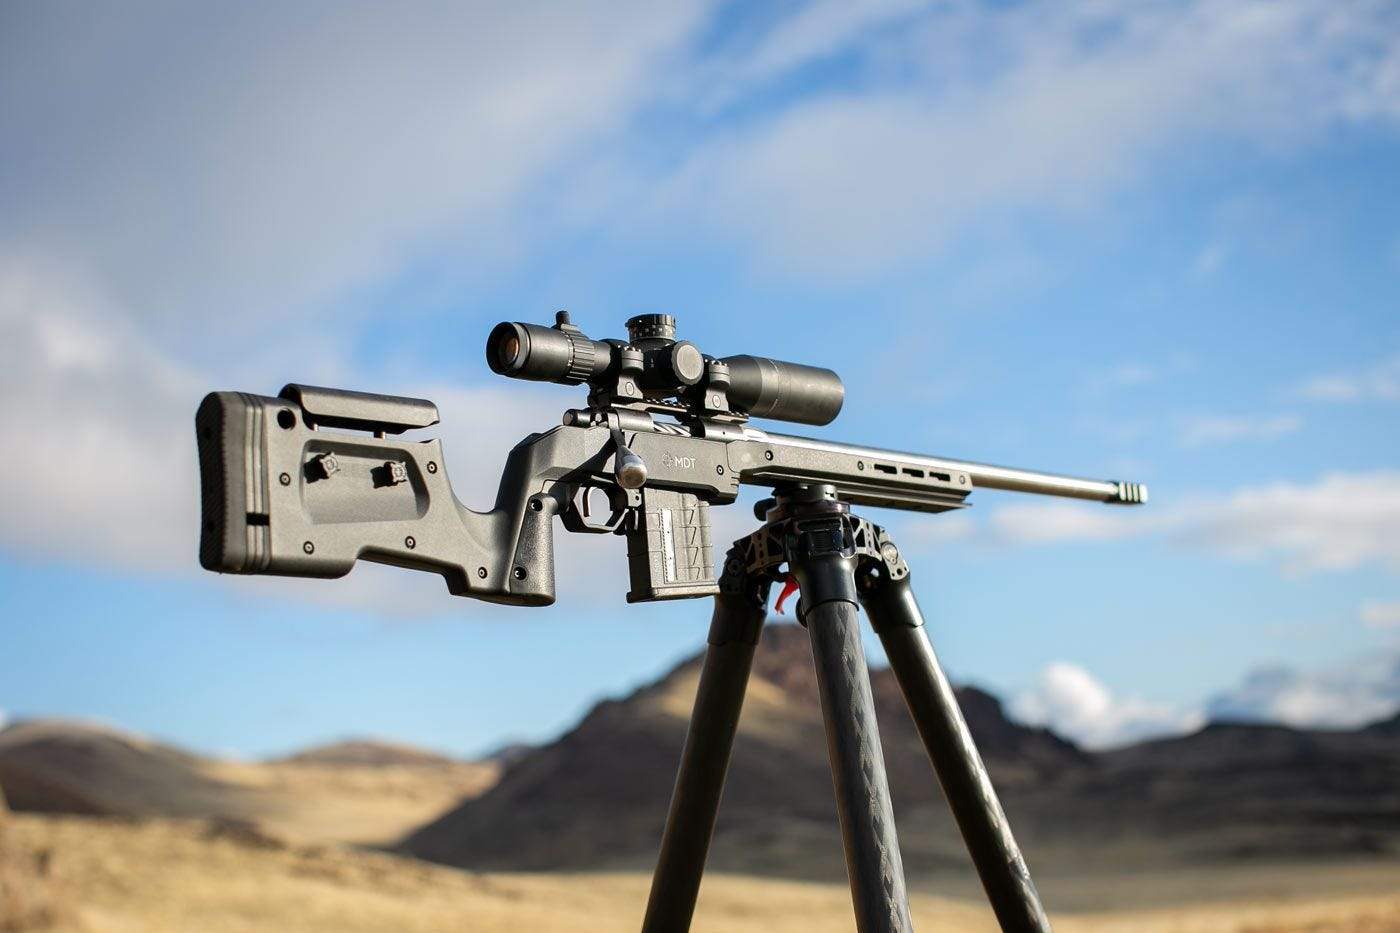 MDT XRS Crossover Rifle Stock Chassis System - Australian Tactical Precision